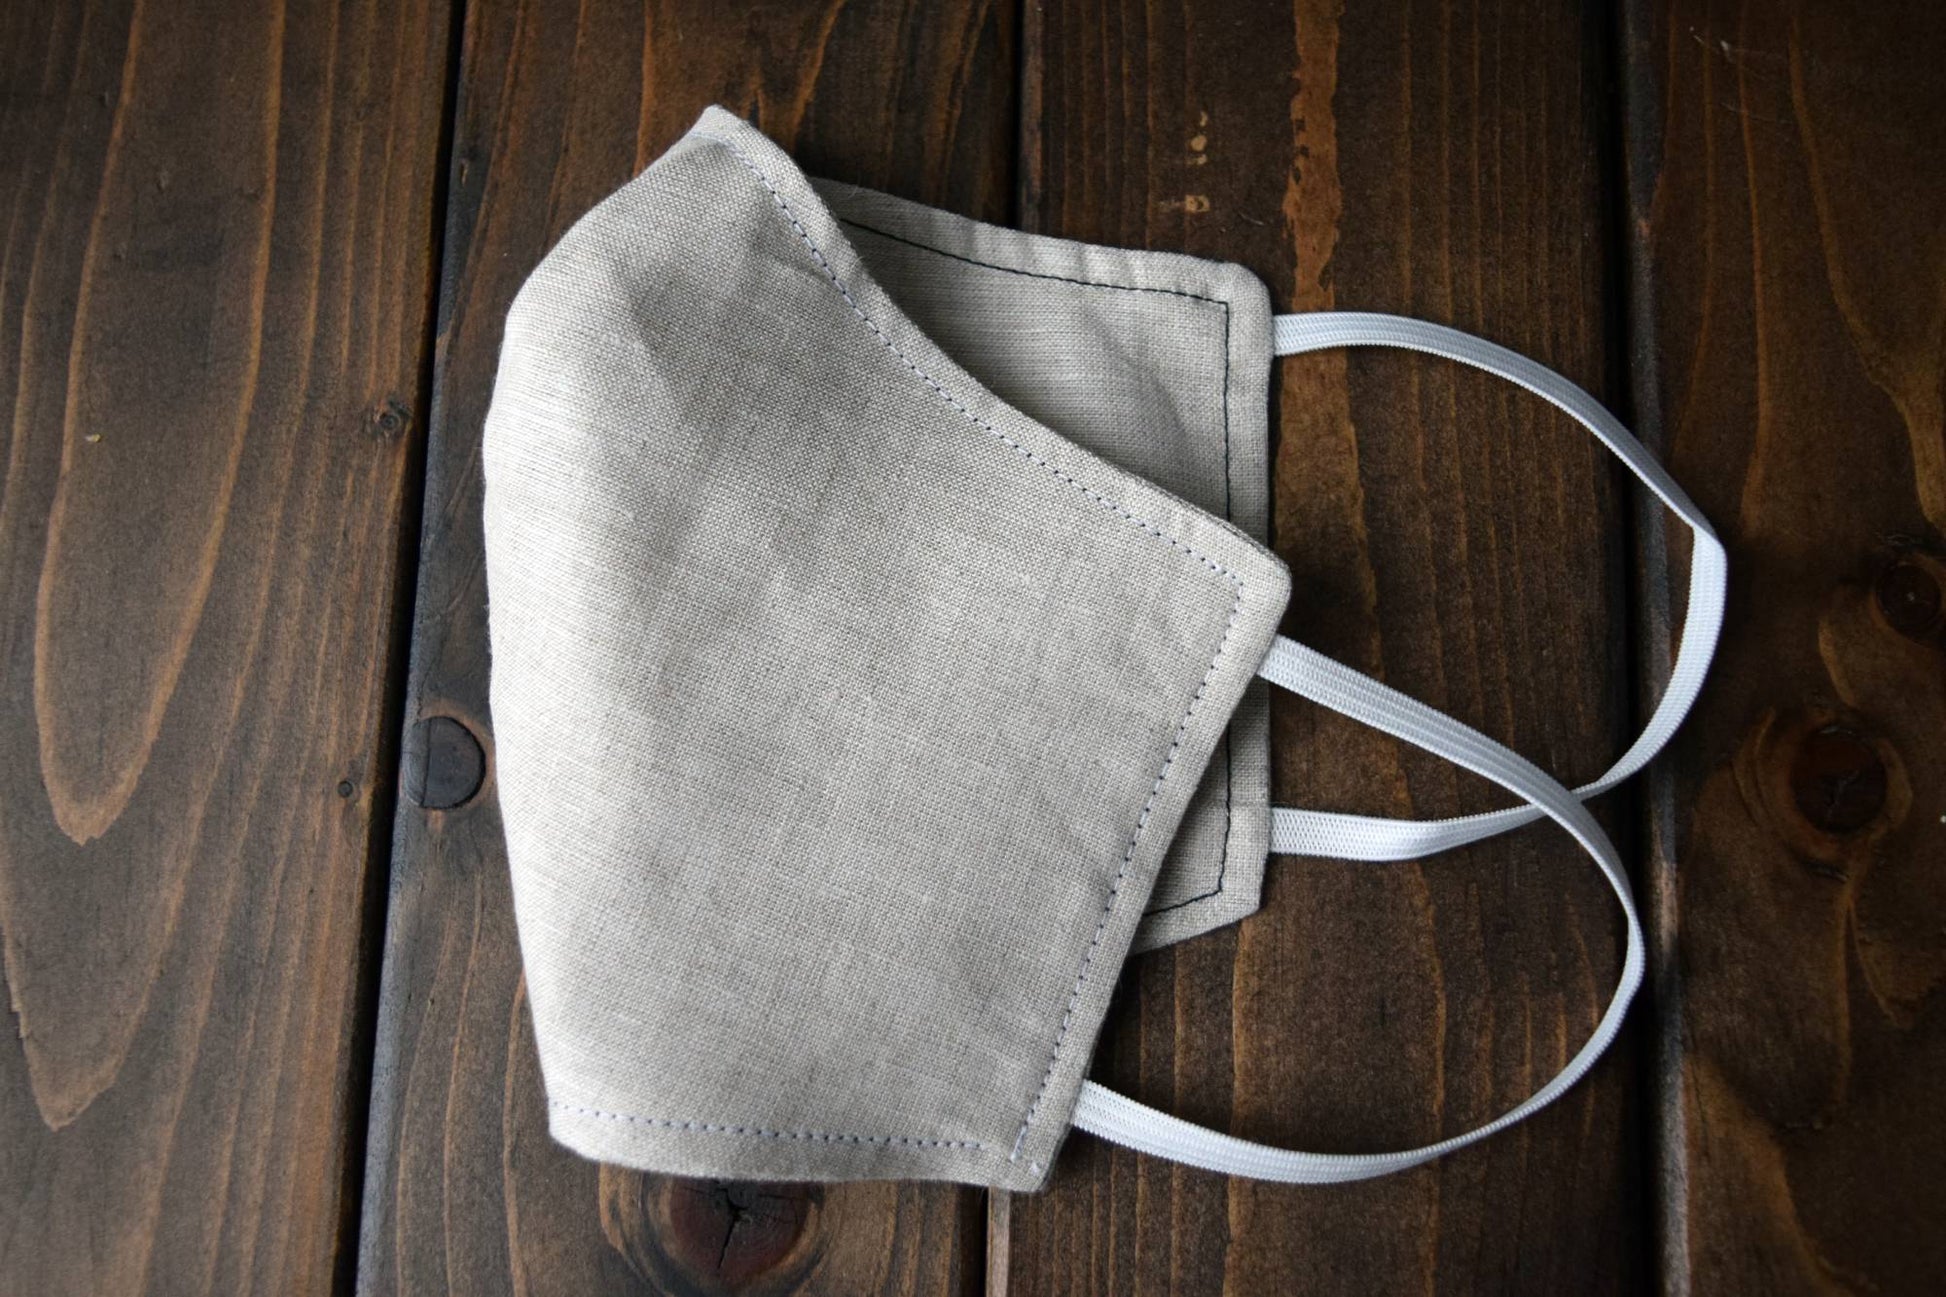 Oatmeal linen face mask folded to show topstitching detail and shape with elastic loops